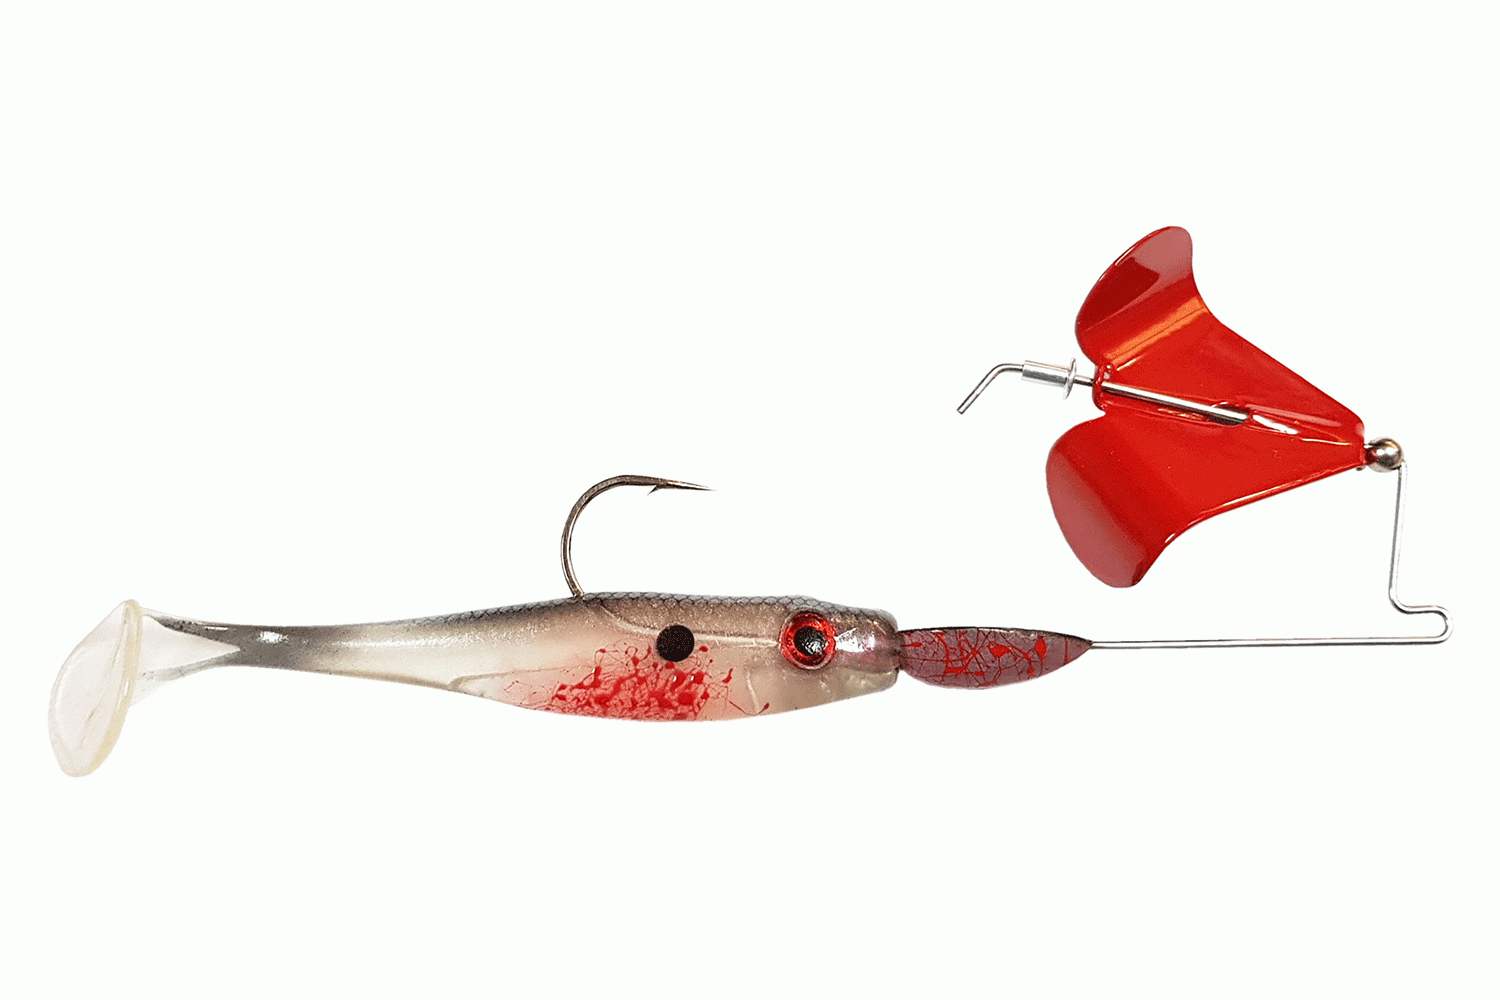 <p><b>Big Bite Baits Suicide Buzz, $6.99</b></p> Big Bite Baits is adding to its successful Suicide Shad Family with the addition of the Suicide Buzz. The top selling swimbait is now available rigged on a buzzbait body on the new Suicide Buzz.  Rigged with a Suicide Shad it creates the ultimate baitfish profile on the surface.  The blade has the perfect âsqueakâ and can easily be tuned to âclackâ the head for added noise. The Suicide Buzz features a quick rising head, designed to quickly plane to the surface. The head has a double wire keeper to firmly hold the swimbait in place. Head and blade colors perfectly match the swimbait, and each pack comes with a spare bait.<br> <a href=